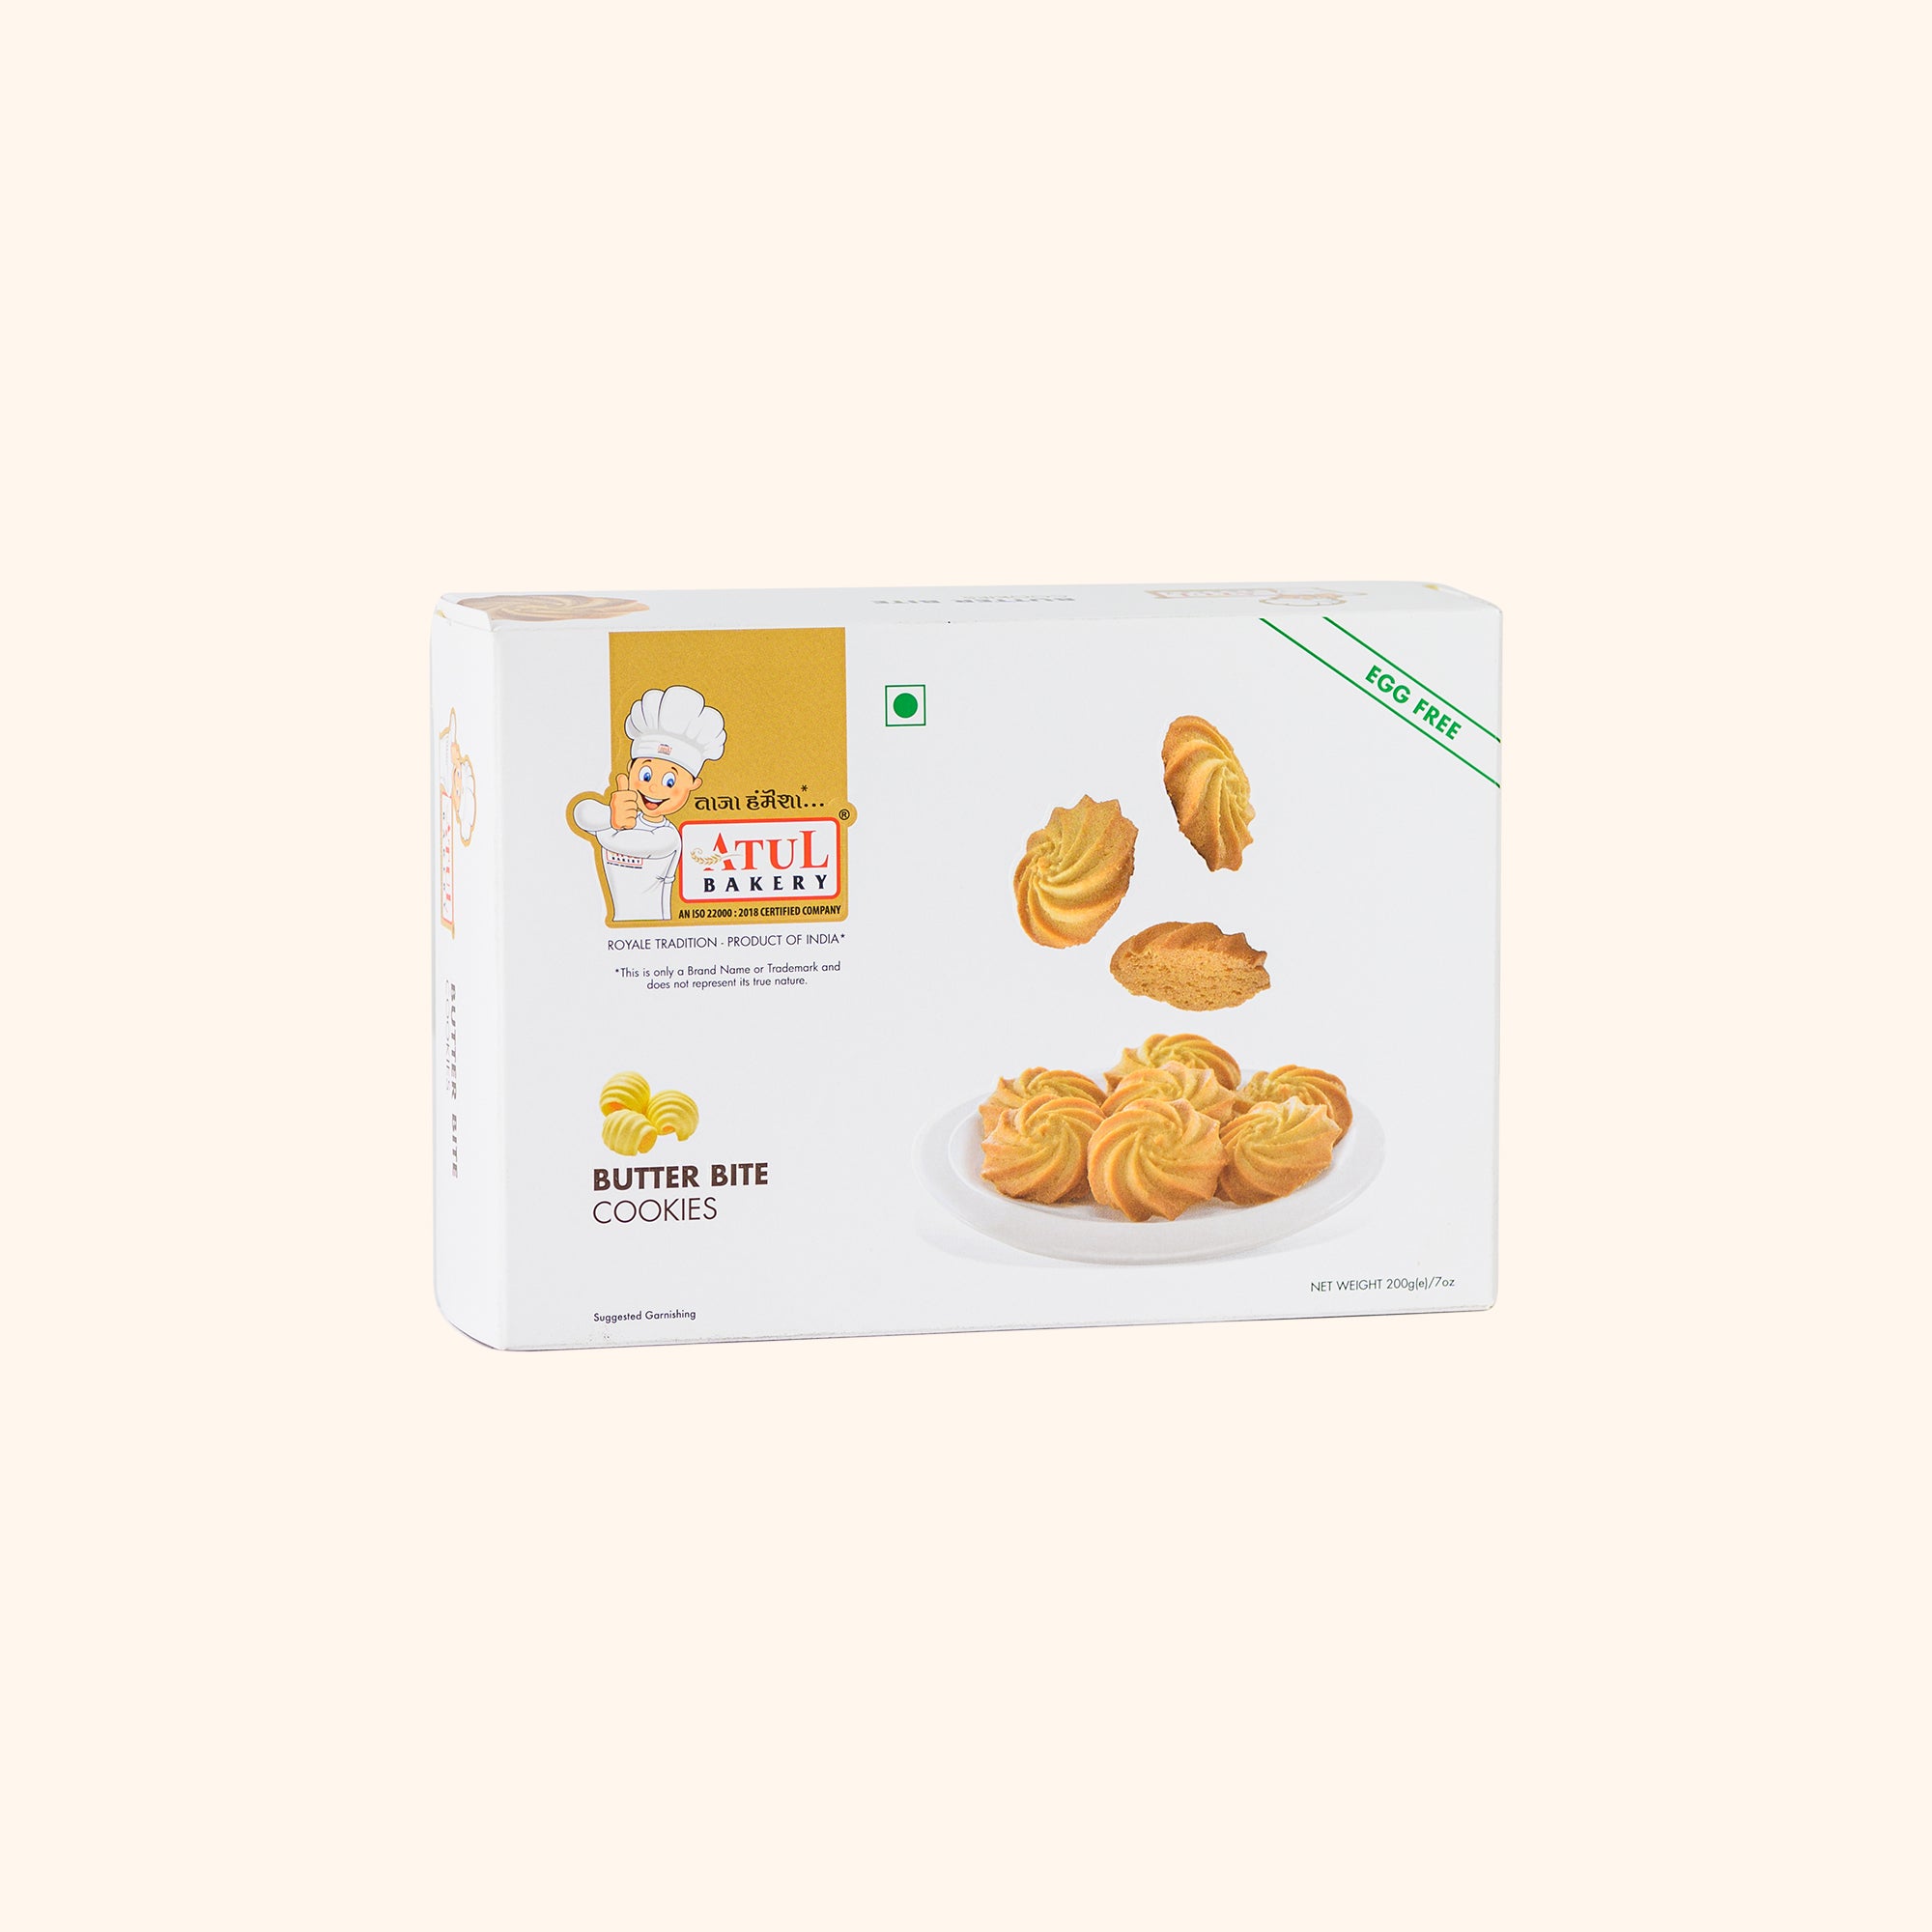 Atul Bakery BUTTER BITE COOKIES || Healthy and Hygienic || PRODUCT OF INDIA